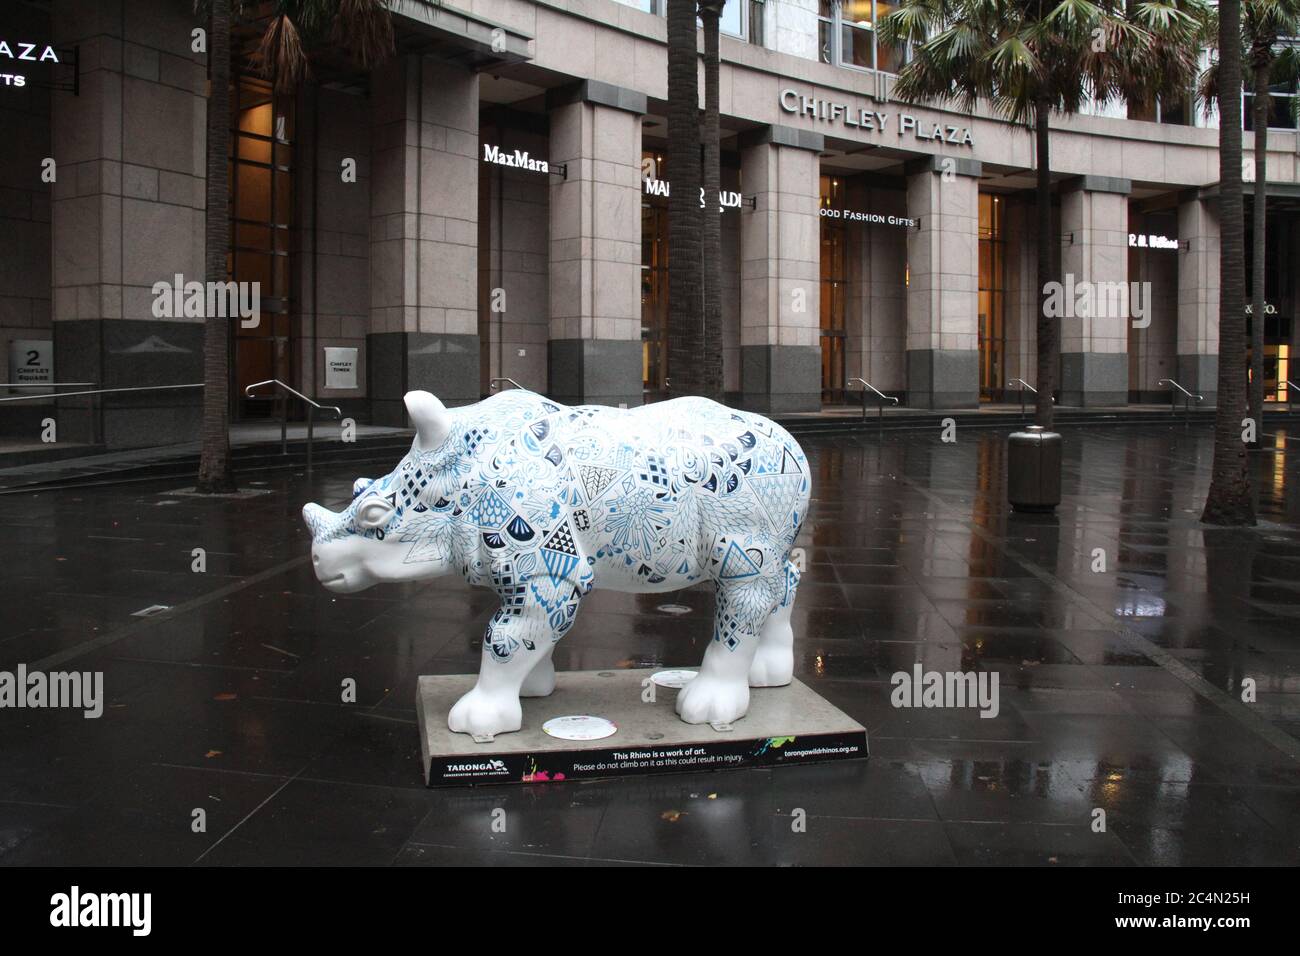 The rhino sculpture called ‘Porcelaine Rhino’ by Rachel Chu, sponsored by QBE Australia. It is located in front of the Chifley Plaza. Stock Photo